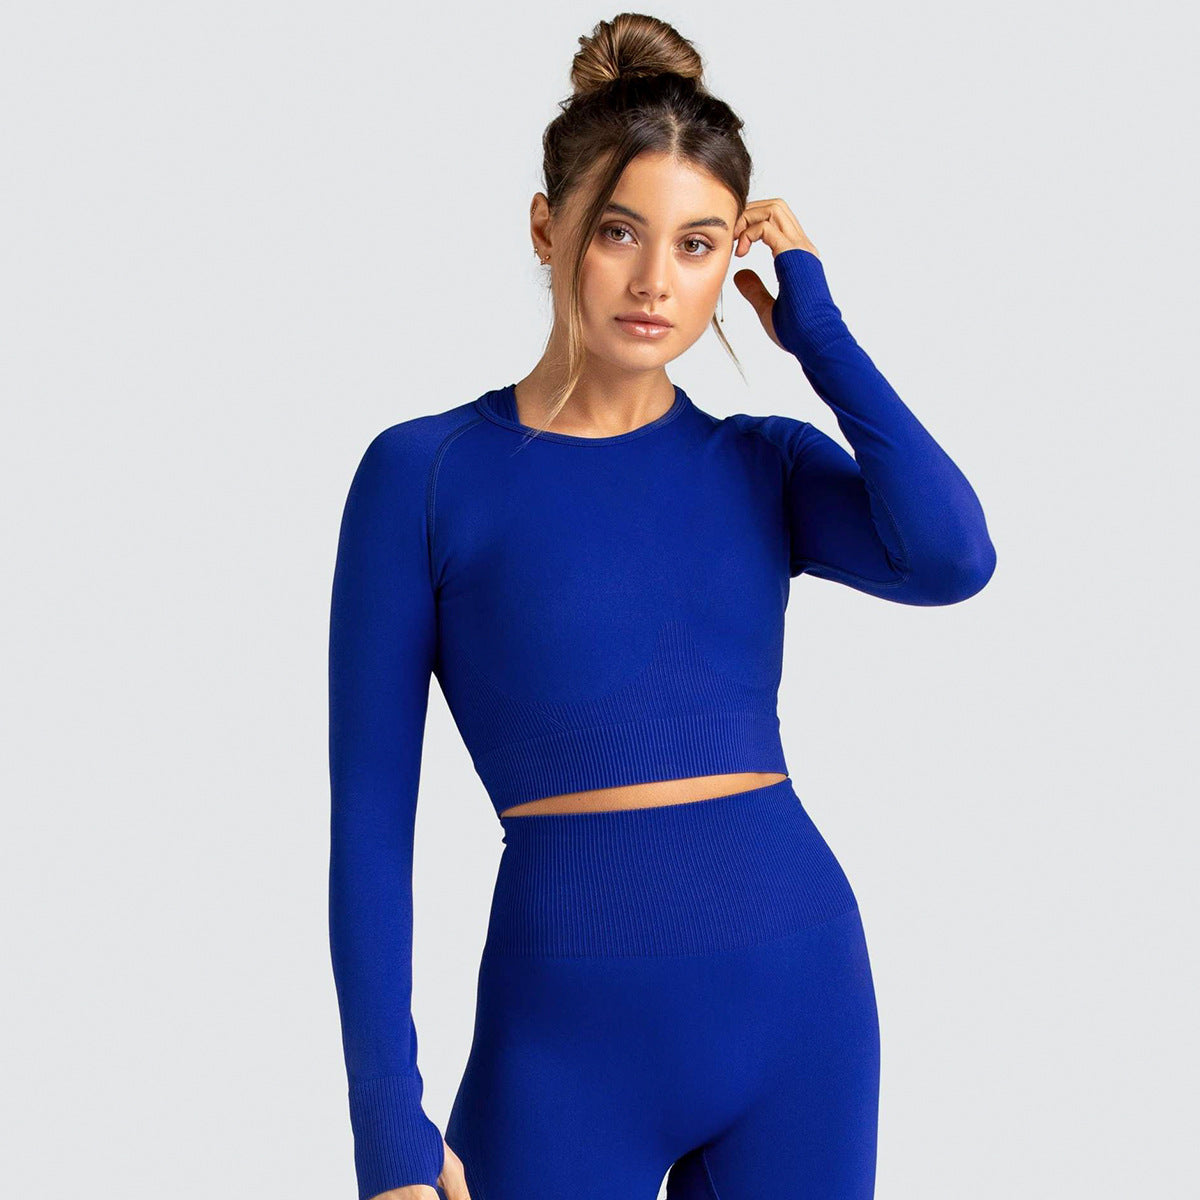 Knitted Workout Clothes | Knitted Yoga Clothes | Monkey Business Gym